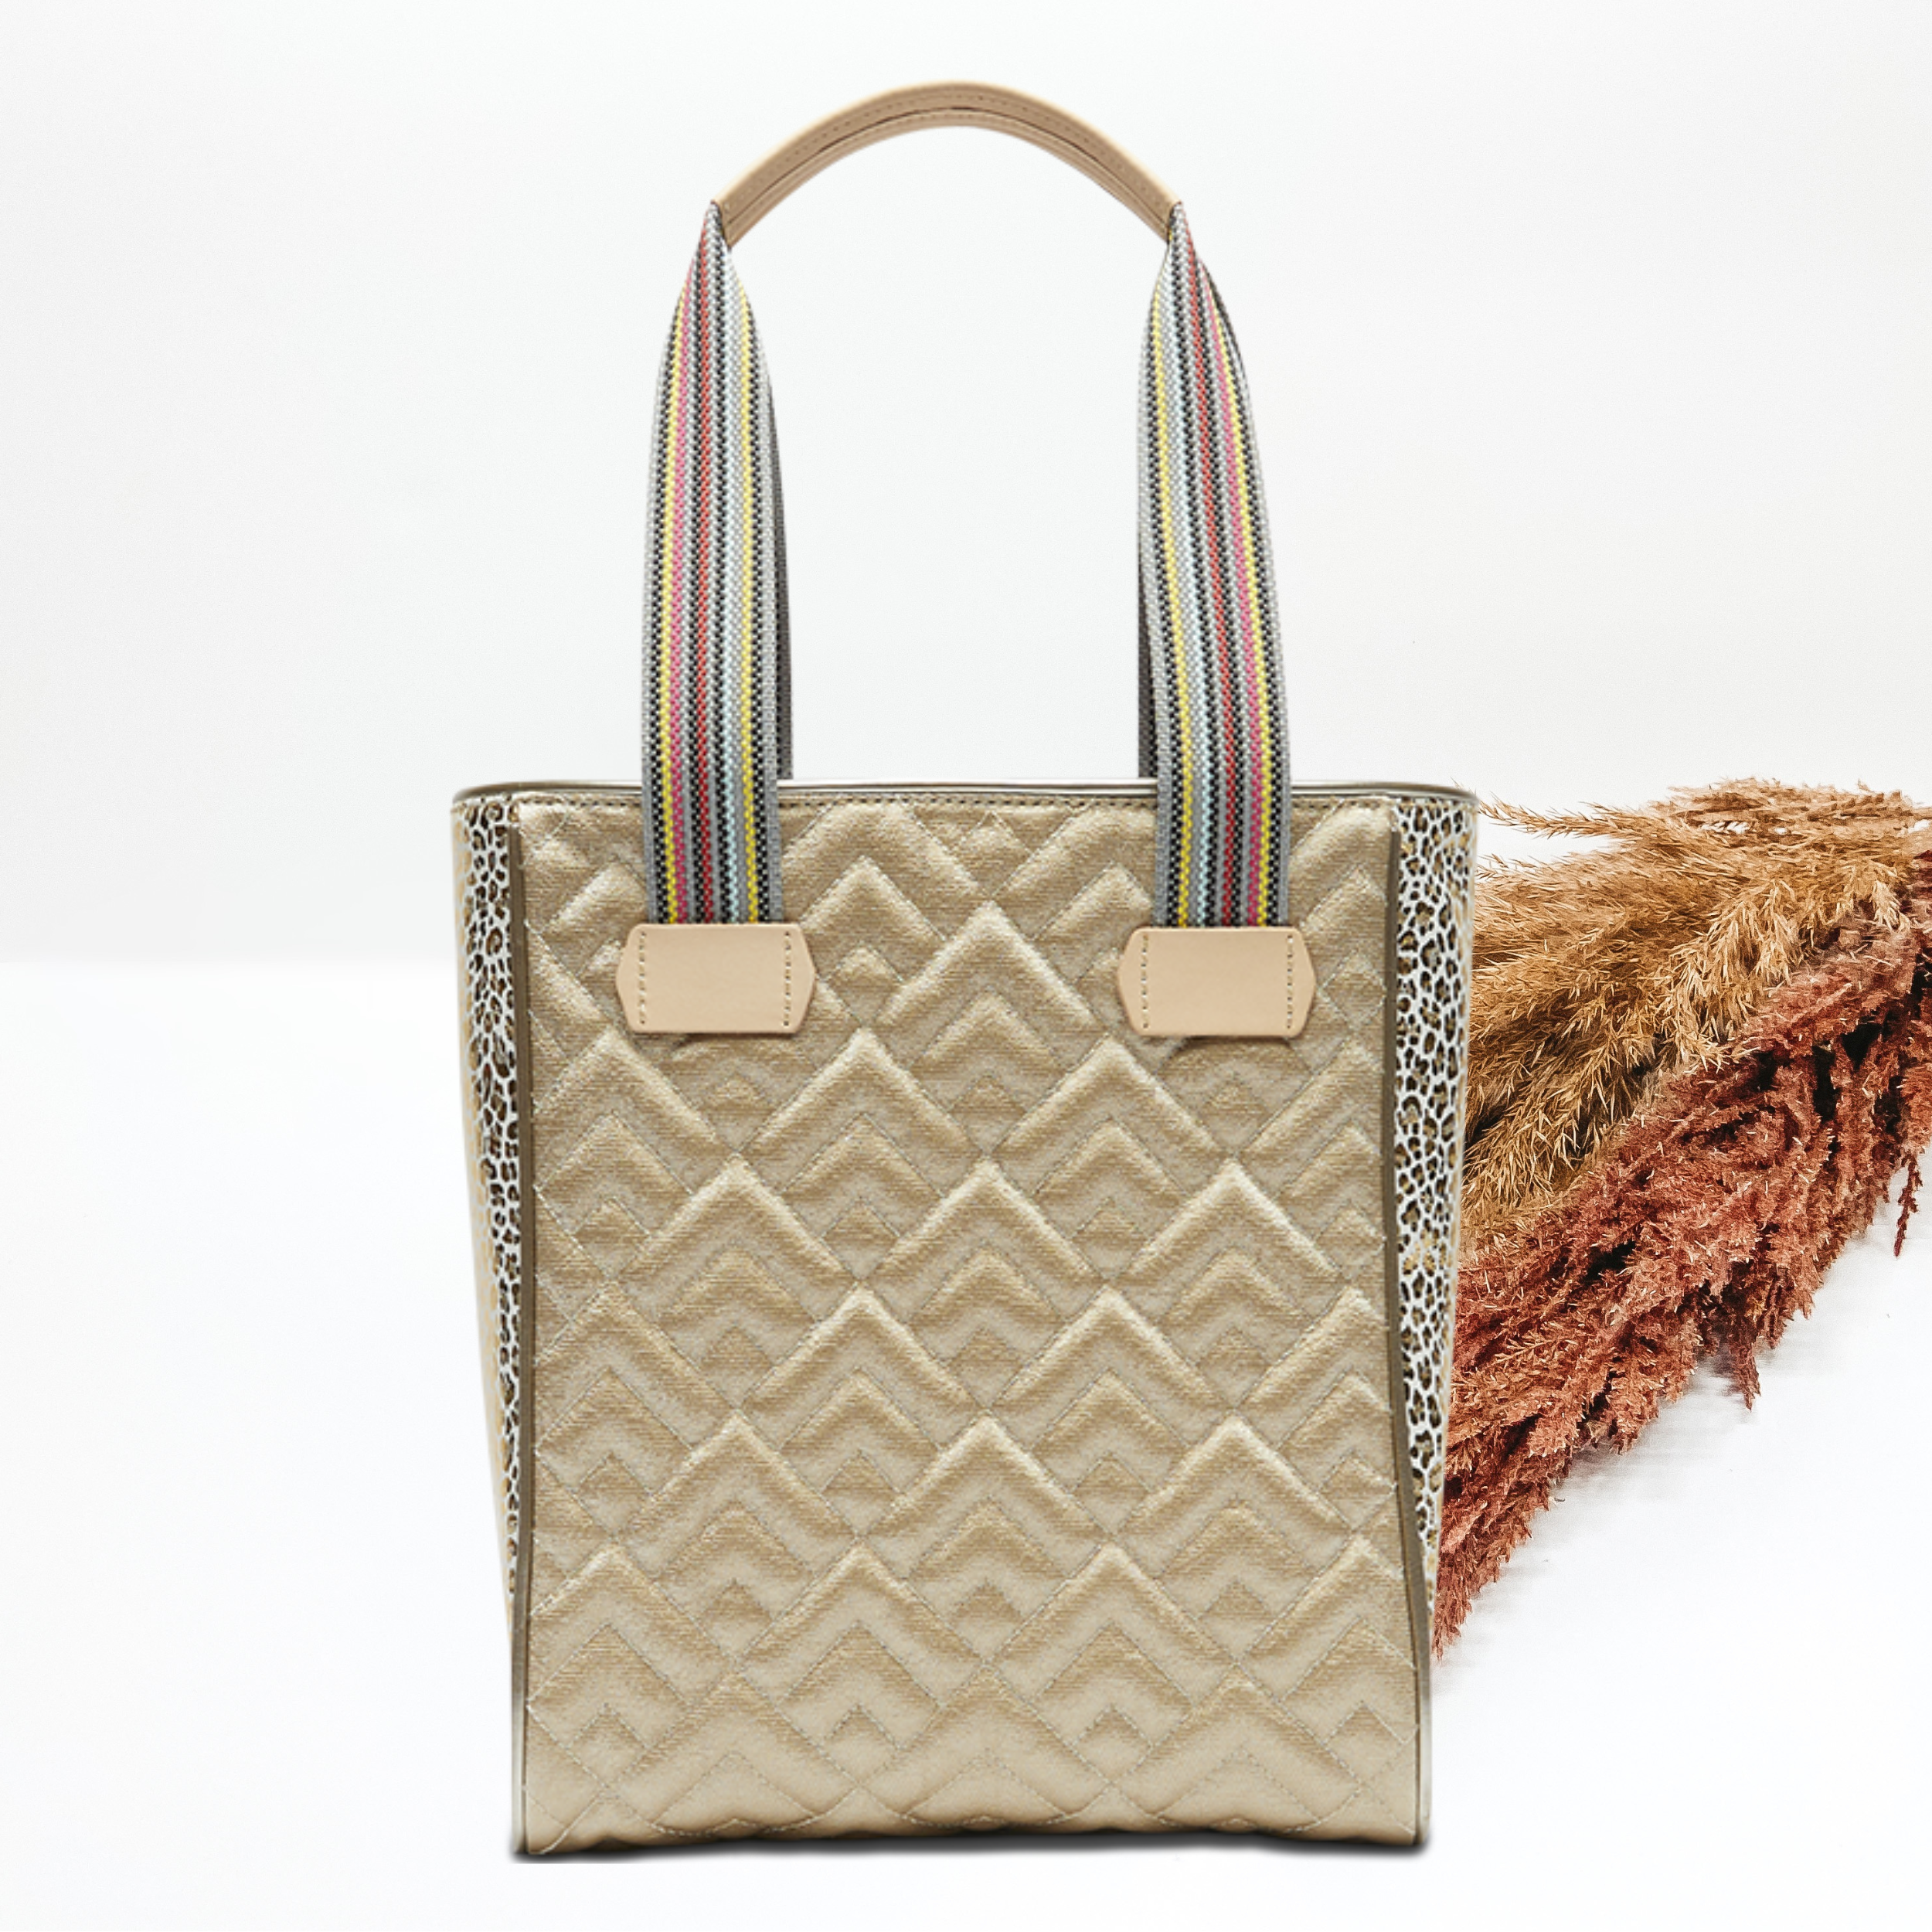 Pictured on a white background is a gold chica tote bag with woven straps and light tan handles. This bag includes a diamond stitched pattern and gold leopard side panels. 